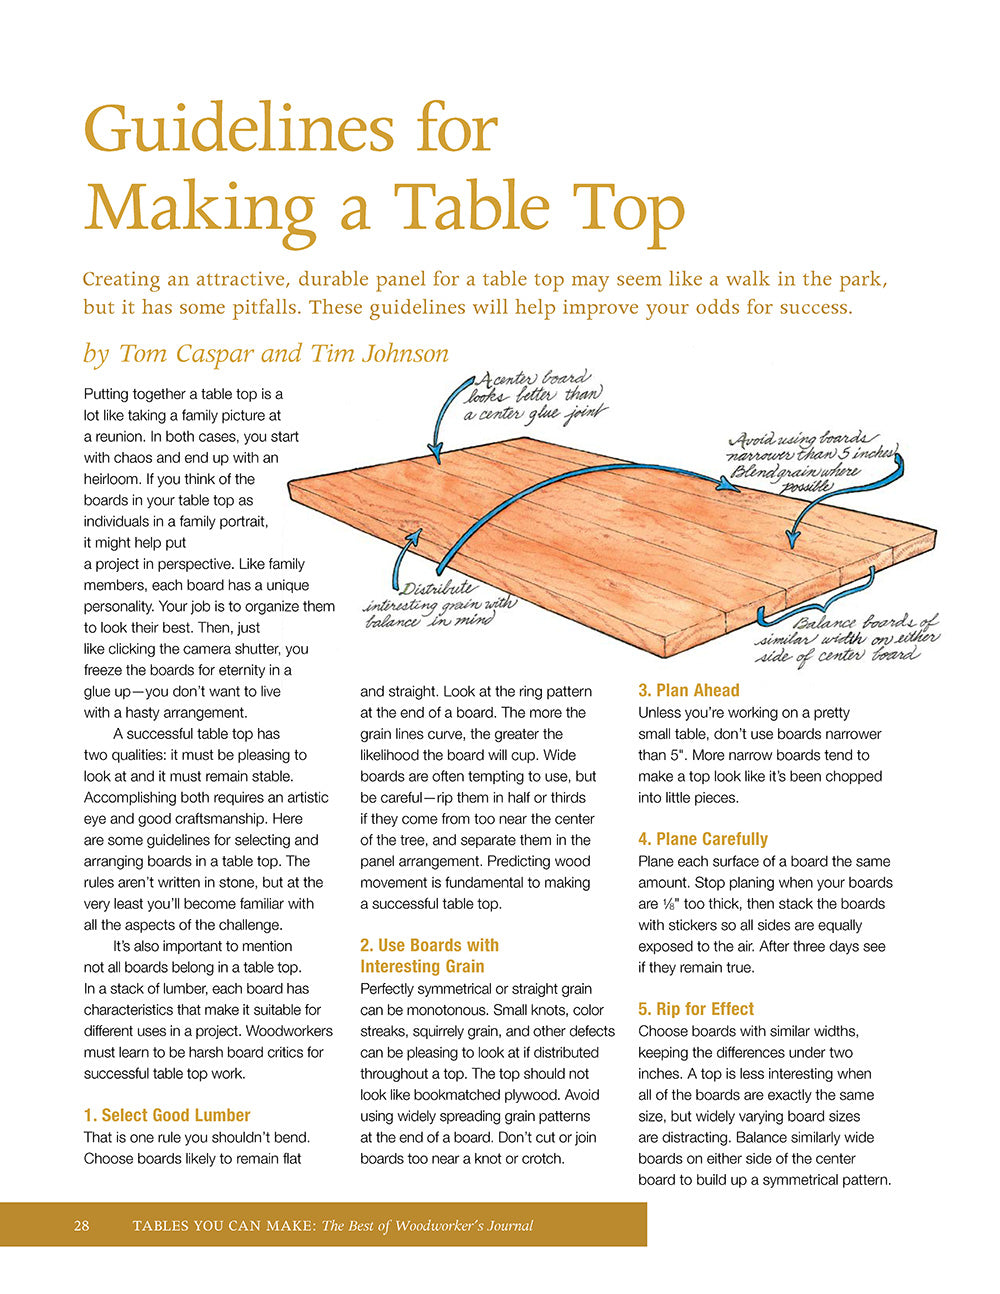 Tables You Can Make